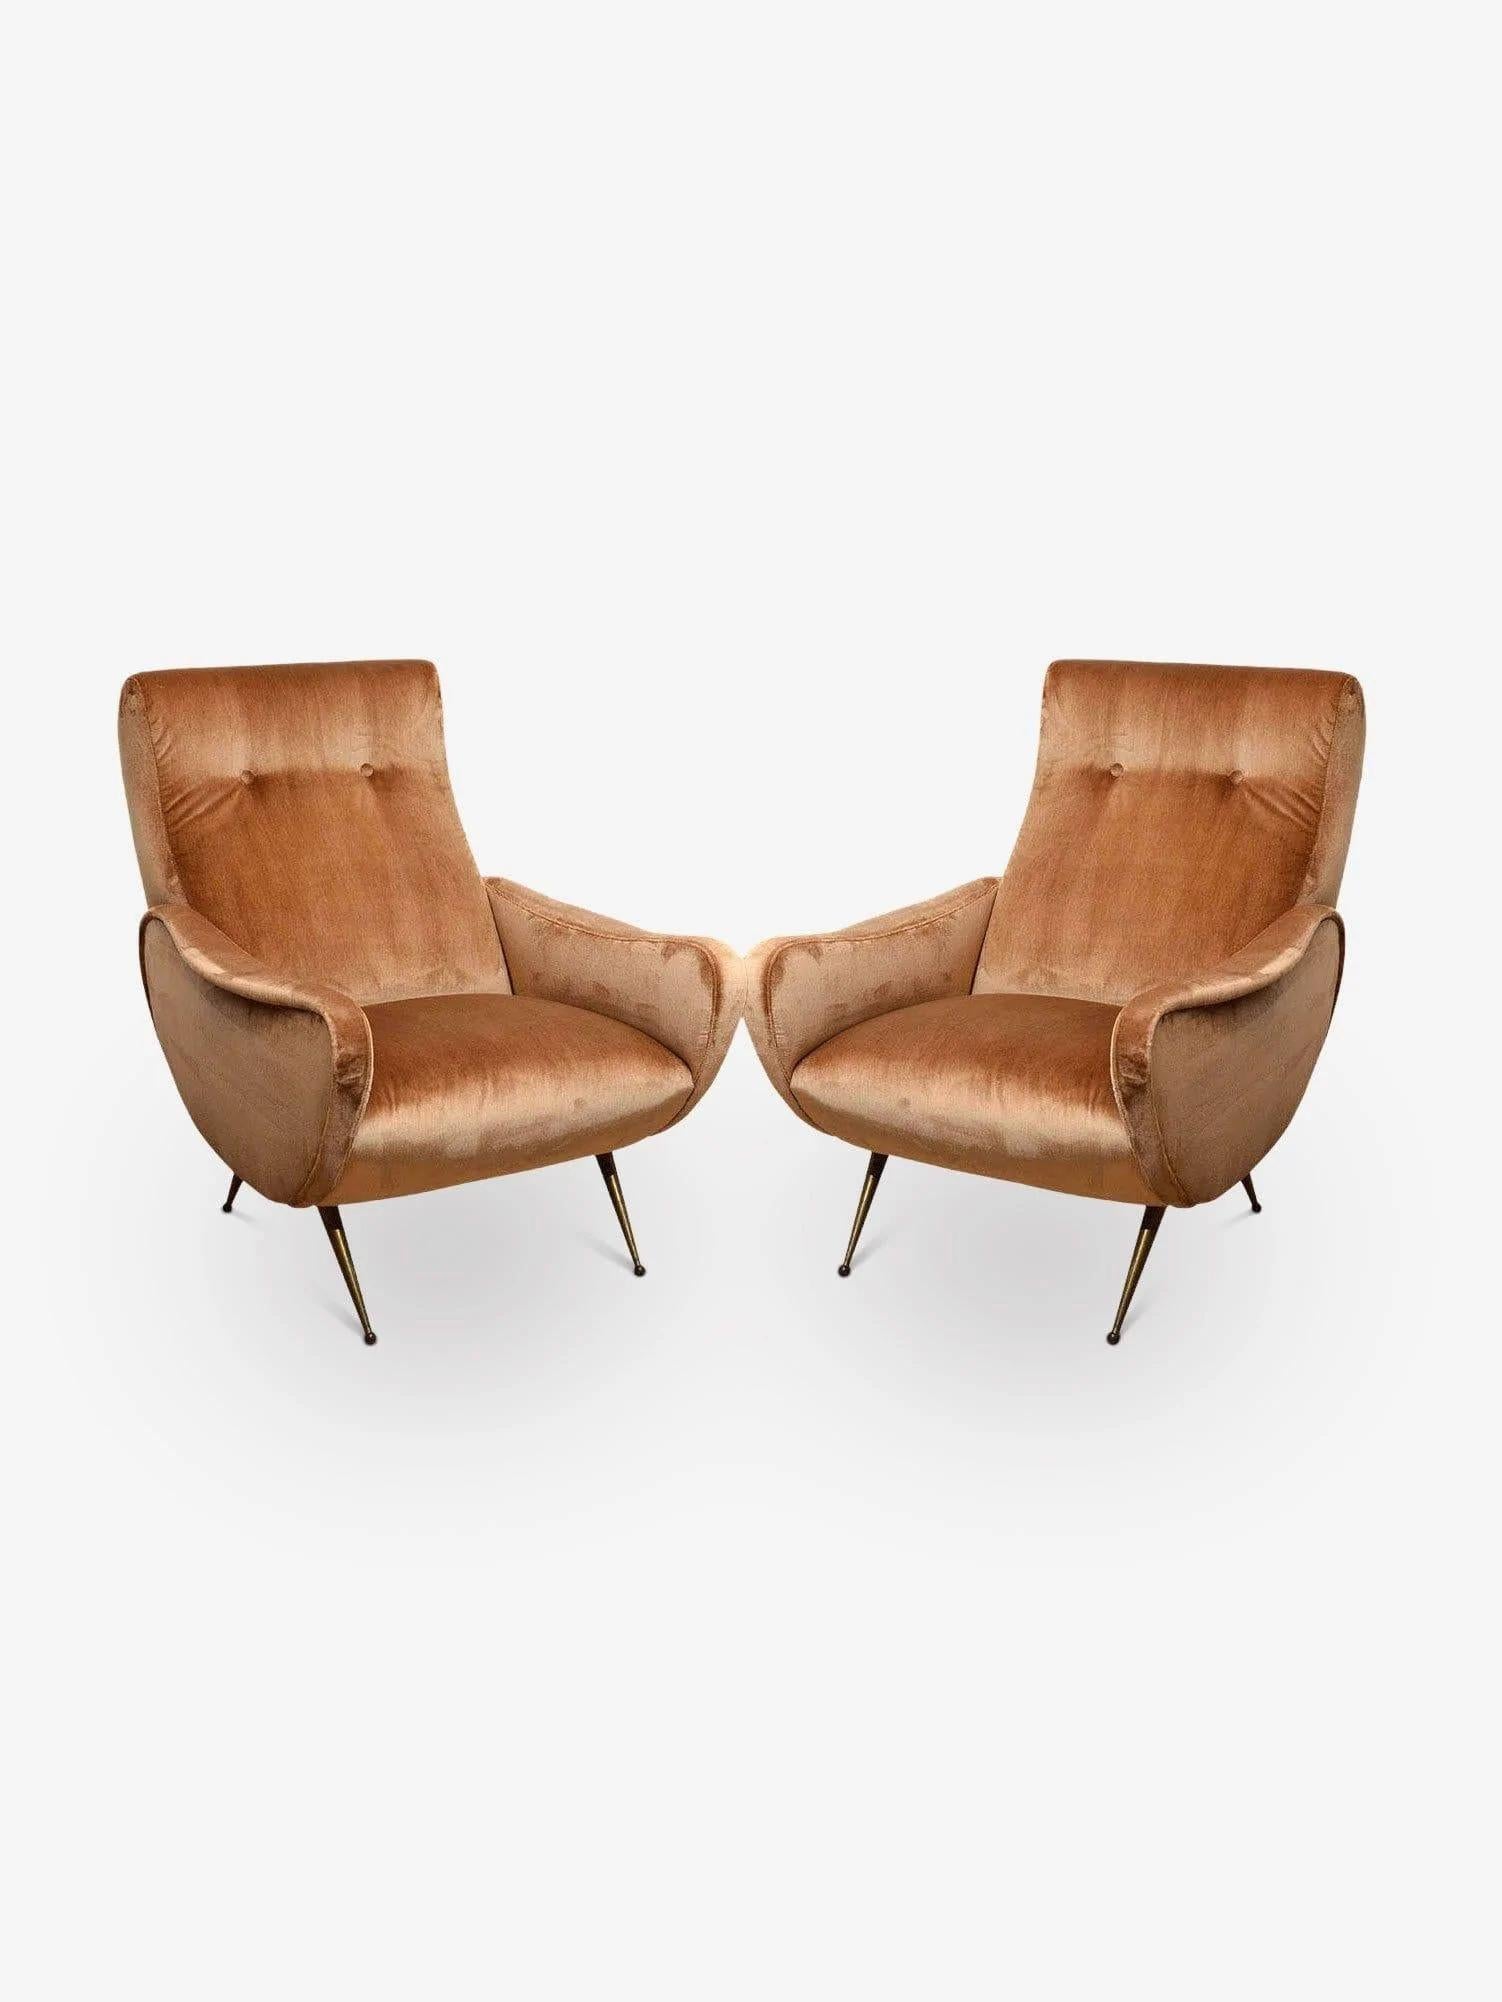 20th Century Italian Mid Century Armchairs in the Style of Marco Zanuso For Sale